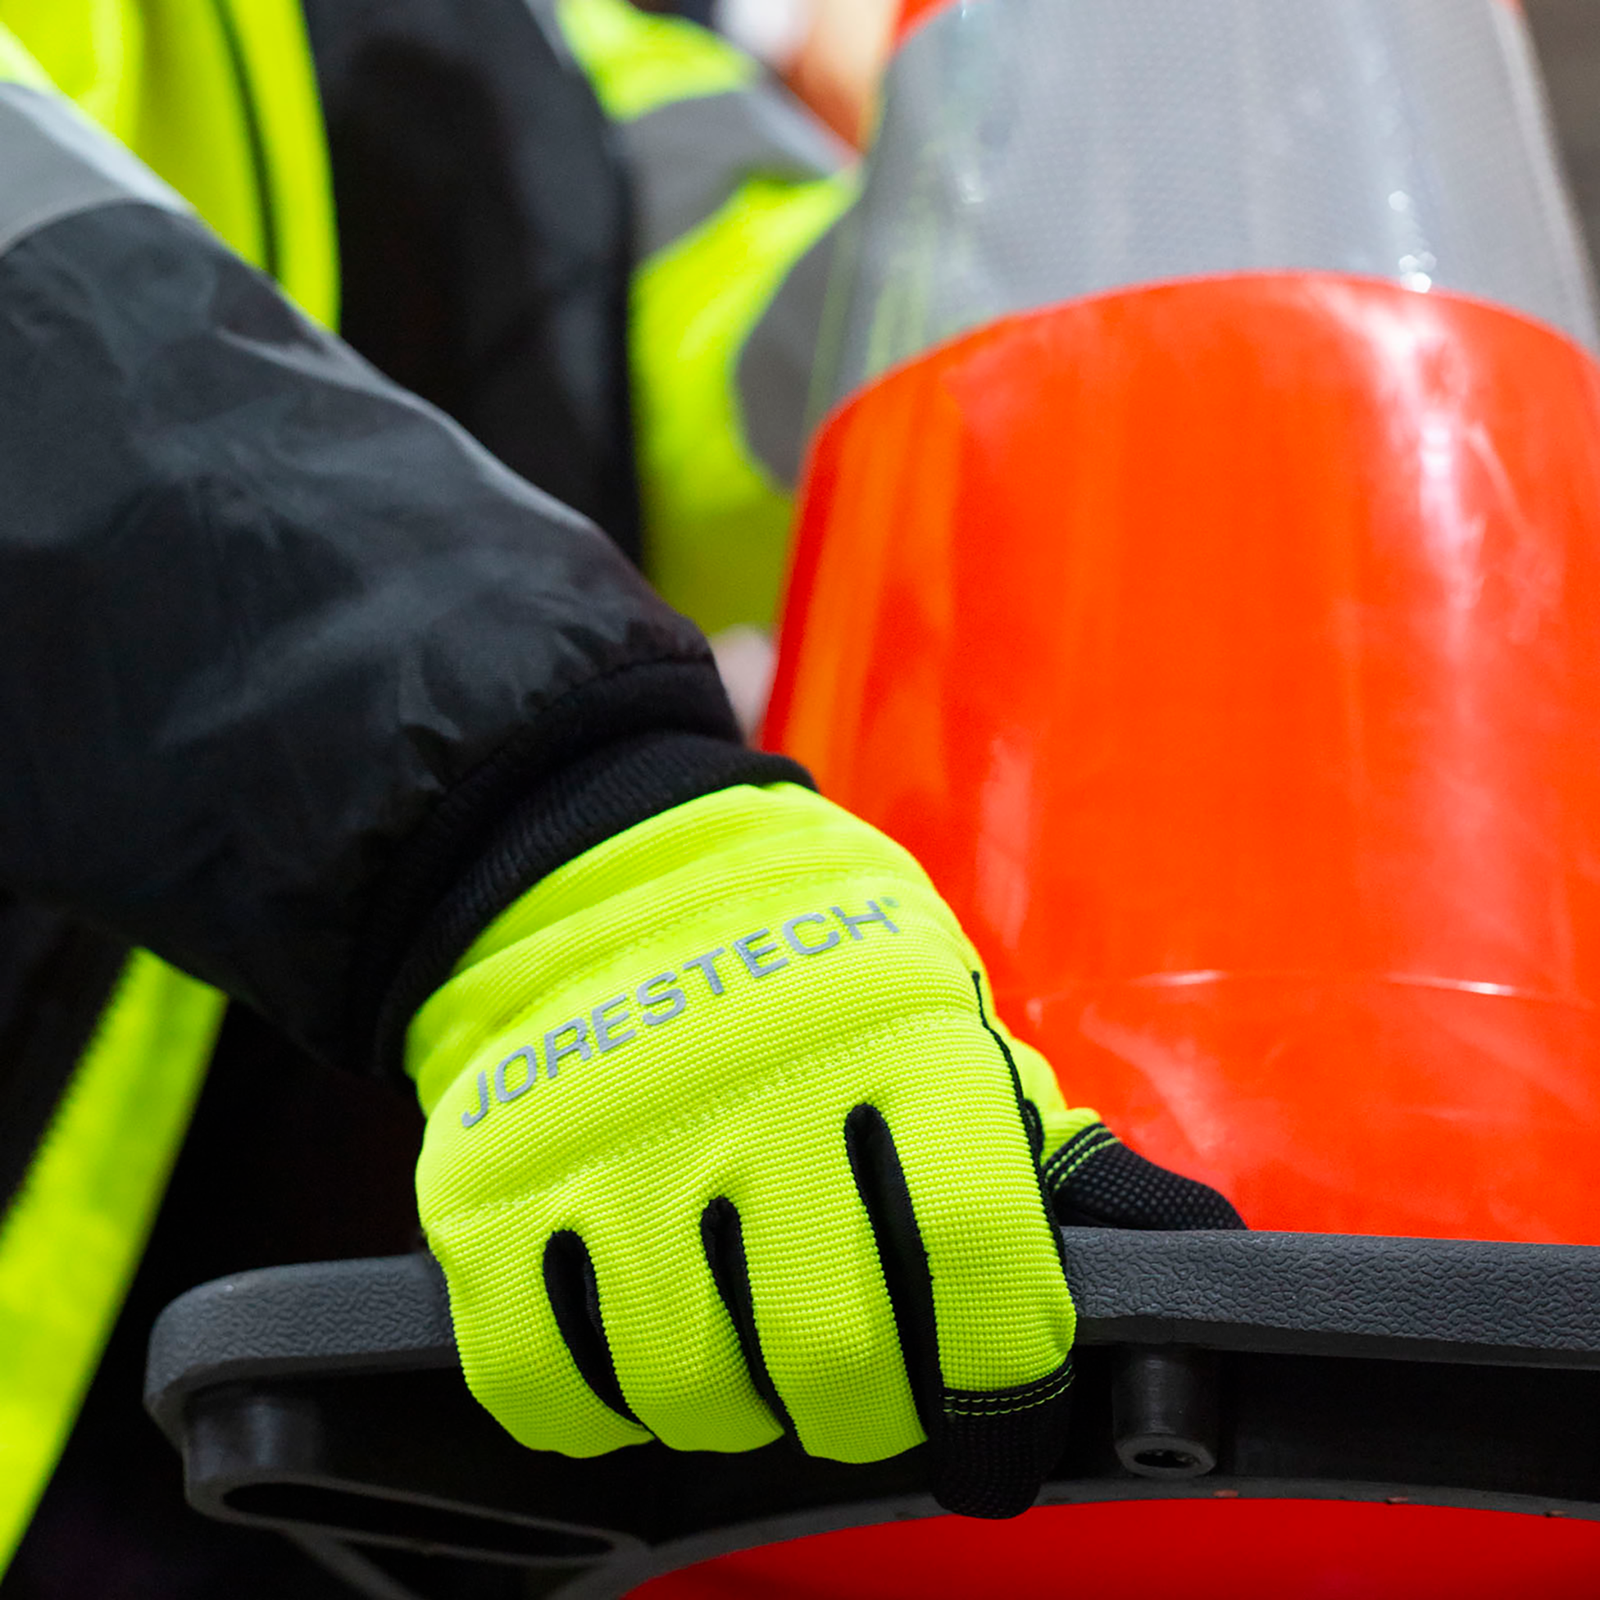 Person wearing the hi-vis multipurpose safety gloves while carrying a street cone